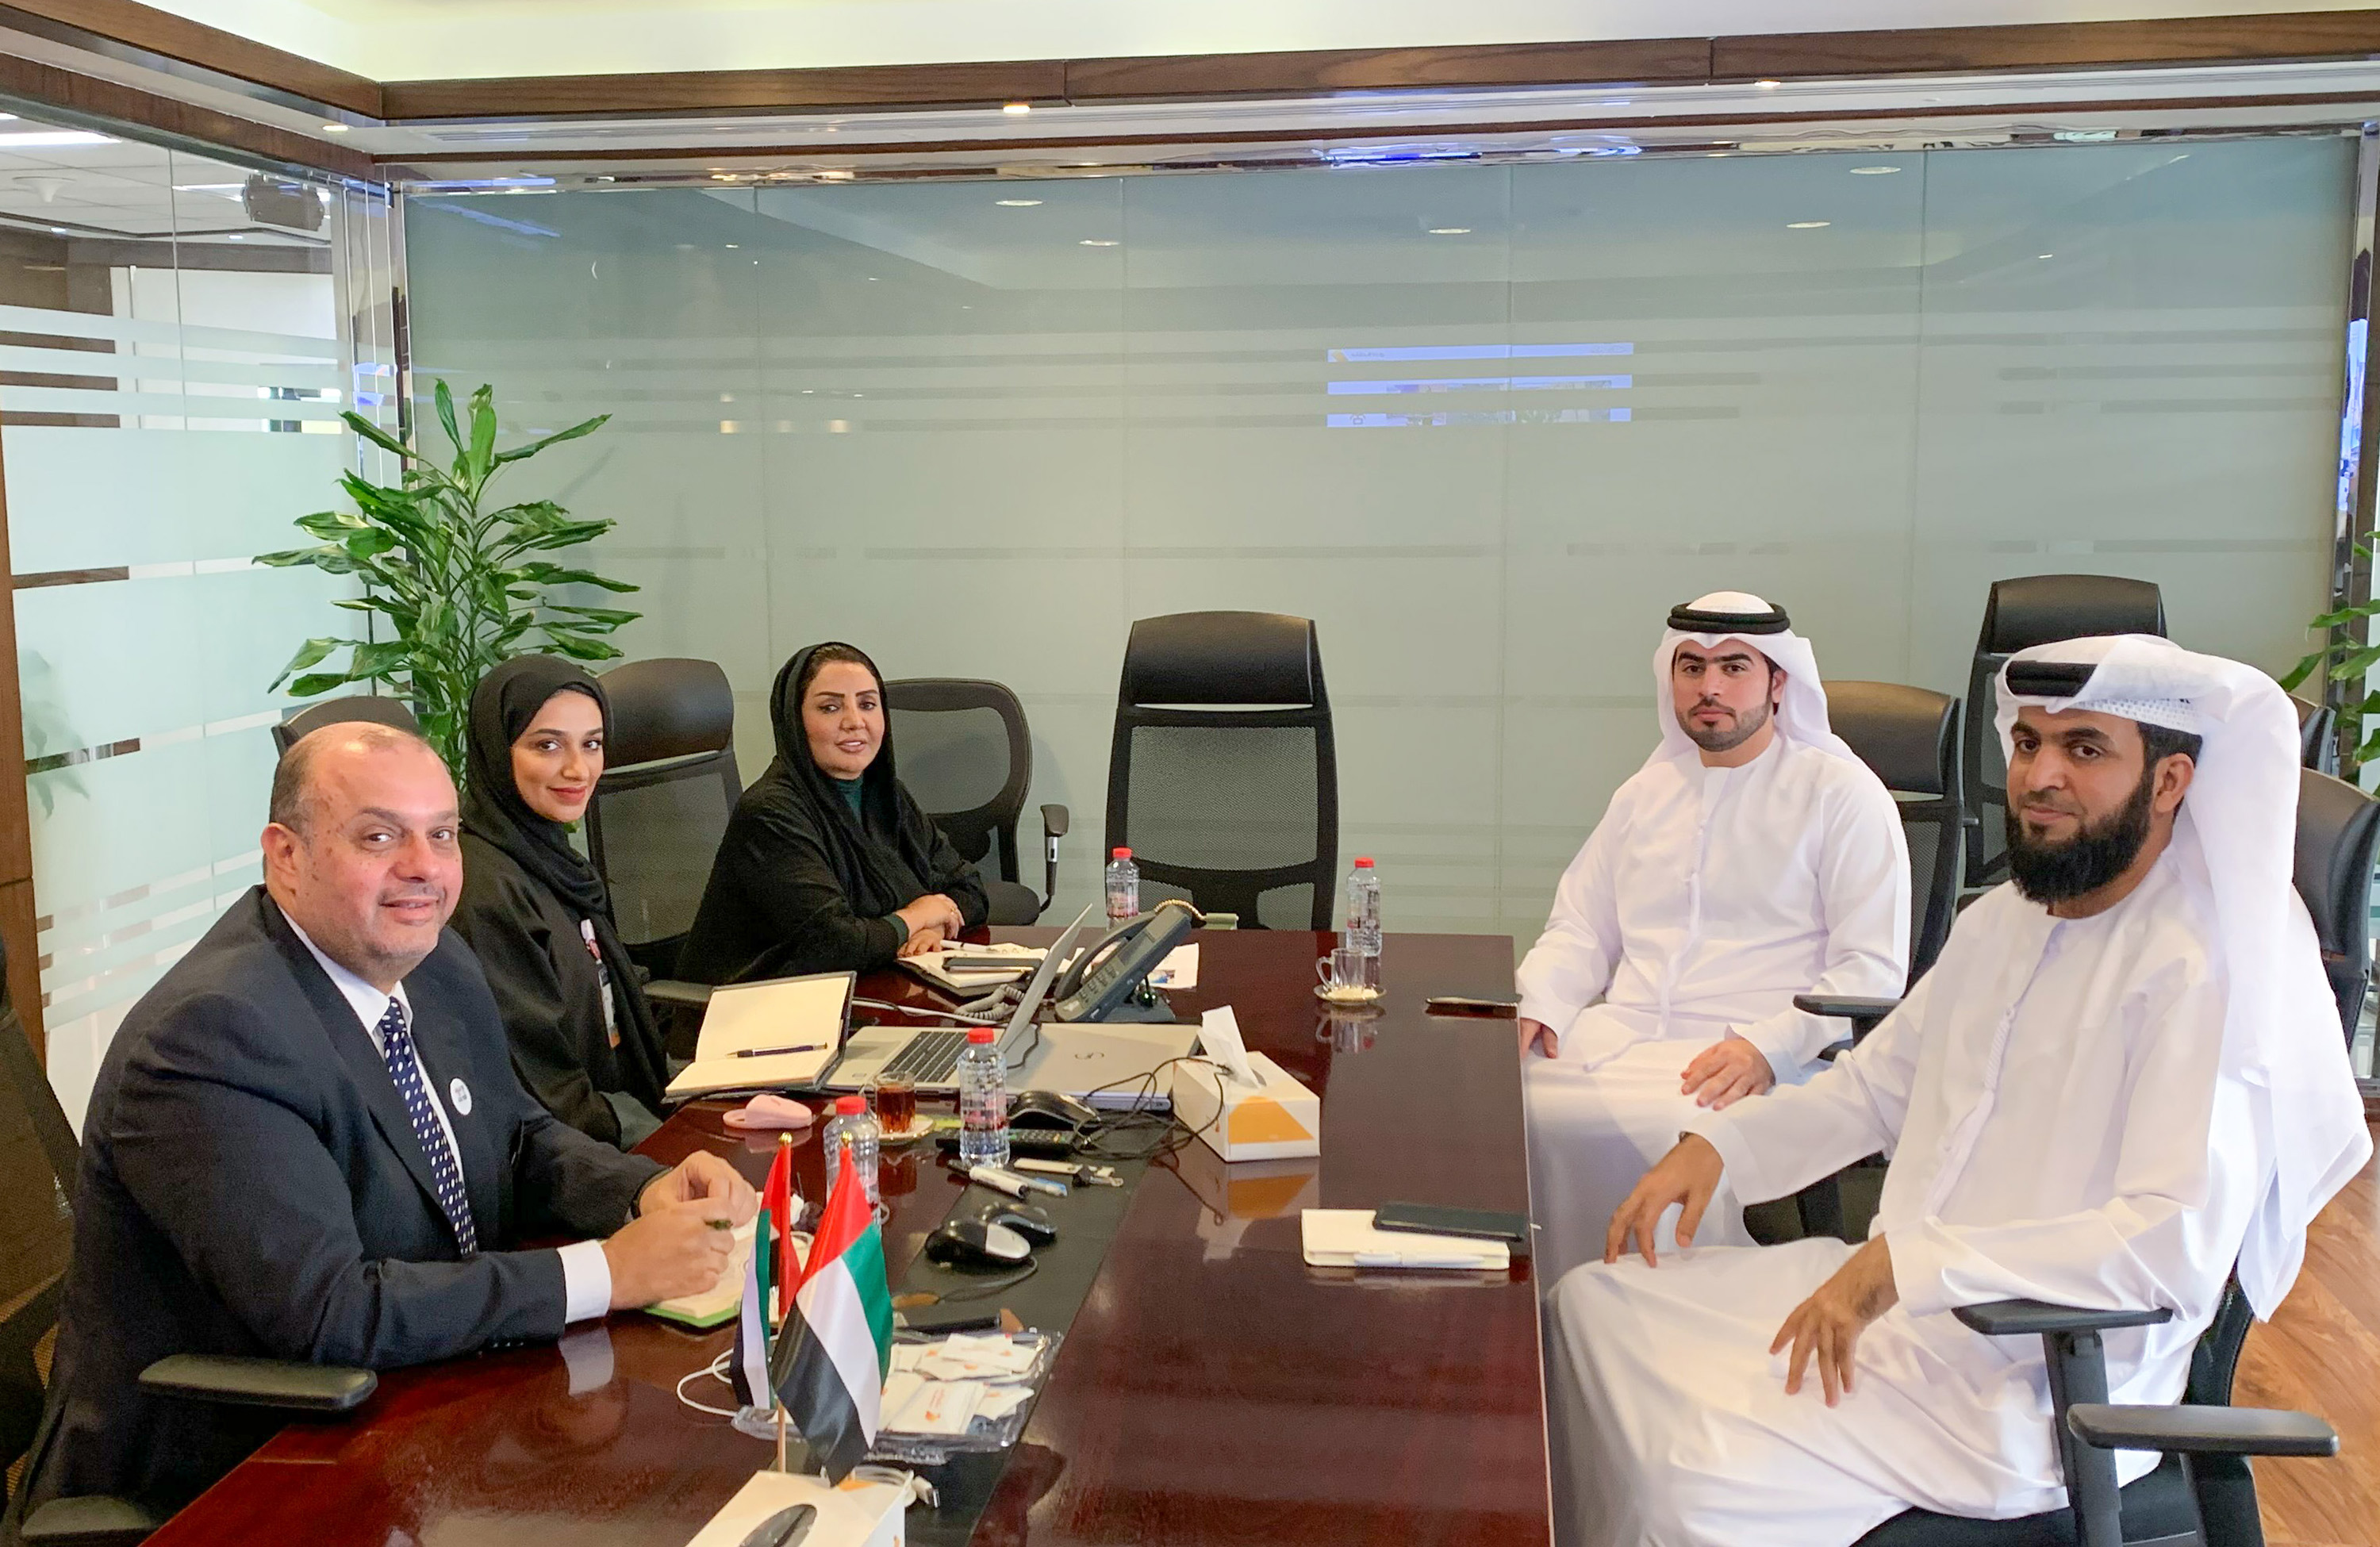 Environment Agency Abu Dhabi: A Visit to Municipality's Headquarter December 2019